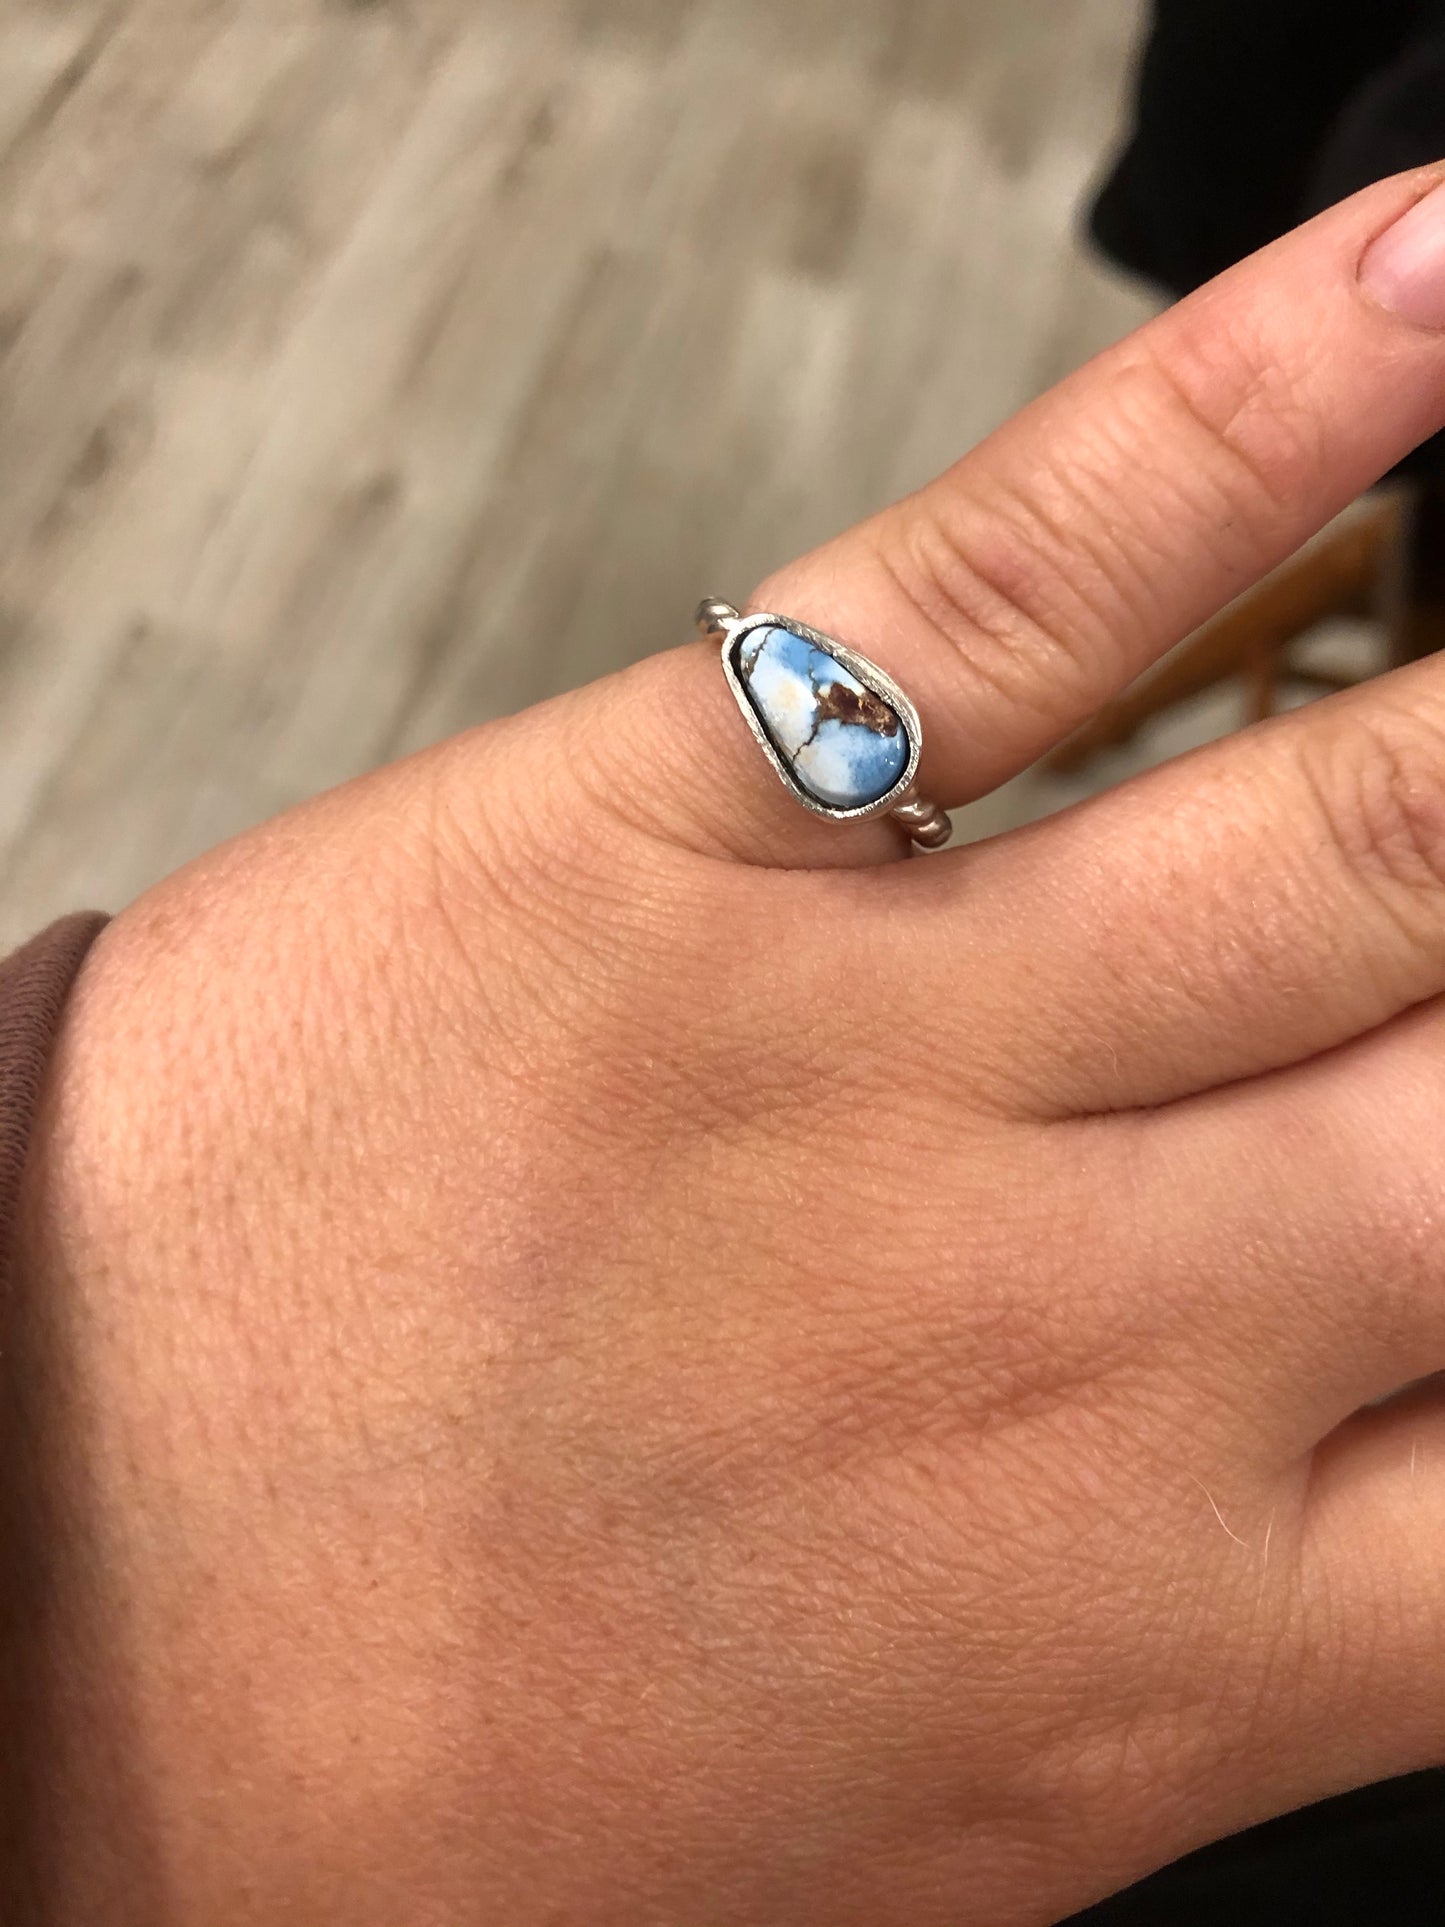 6.5US Twisted Cowgirl ☁️ Turquoise Sterling Silver Ring